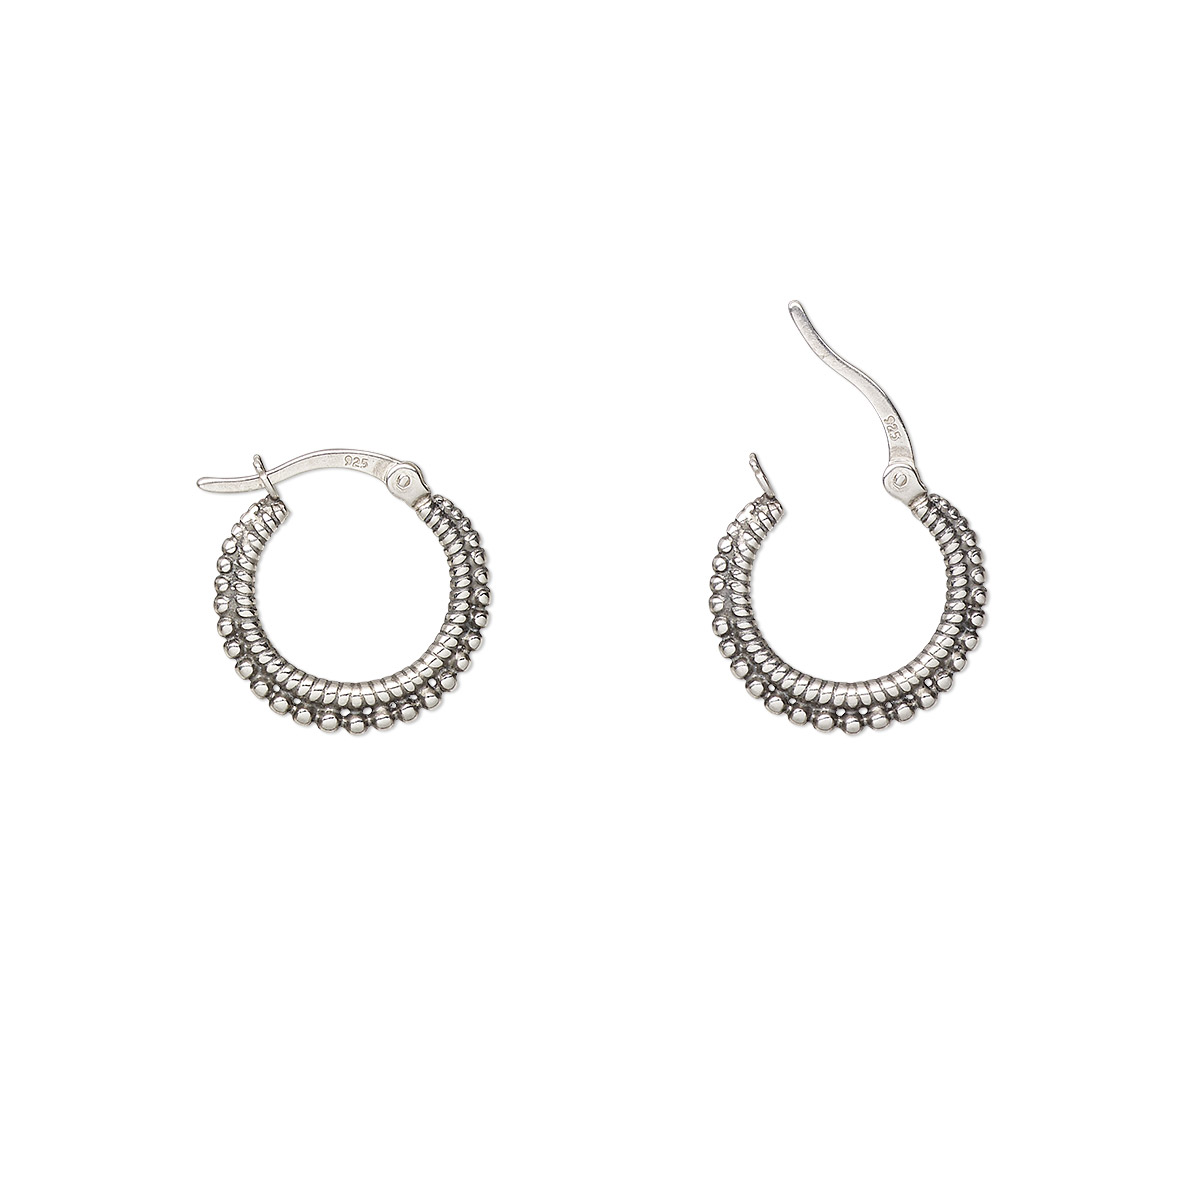 Earring, Create Compliments®, antiqued sterling silver, 19mm hoop with ...